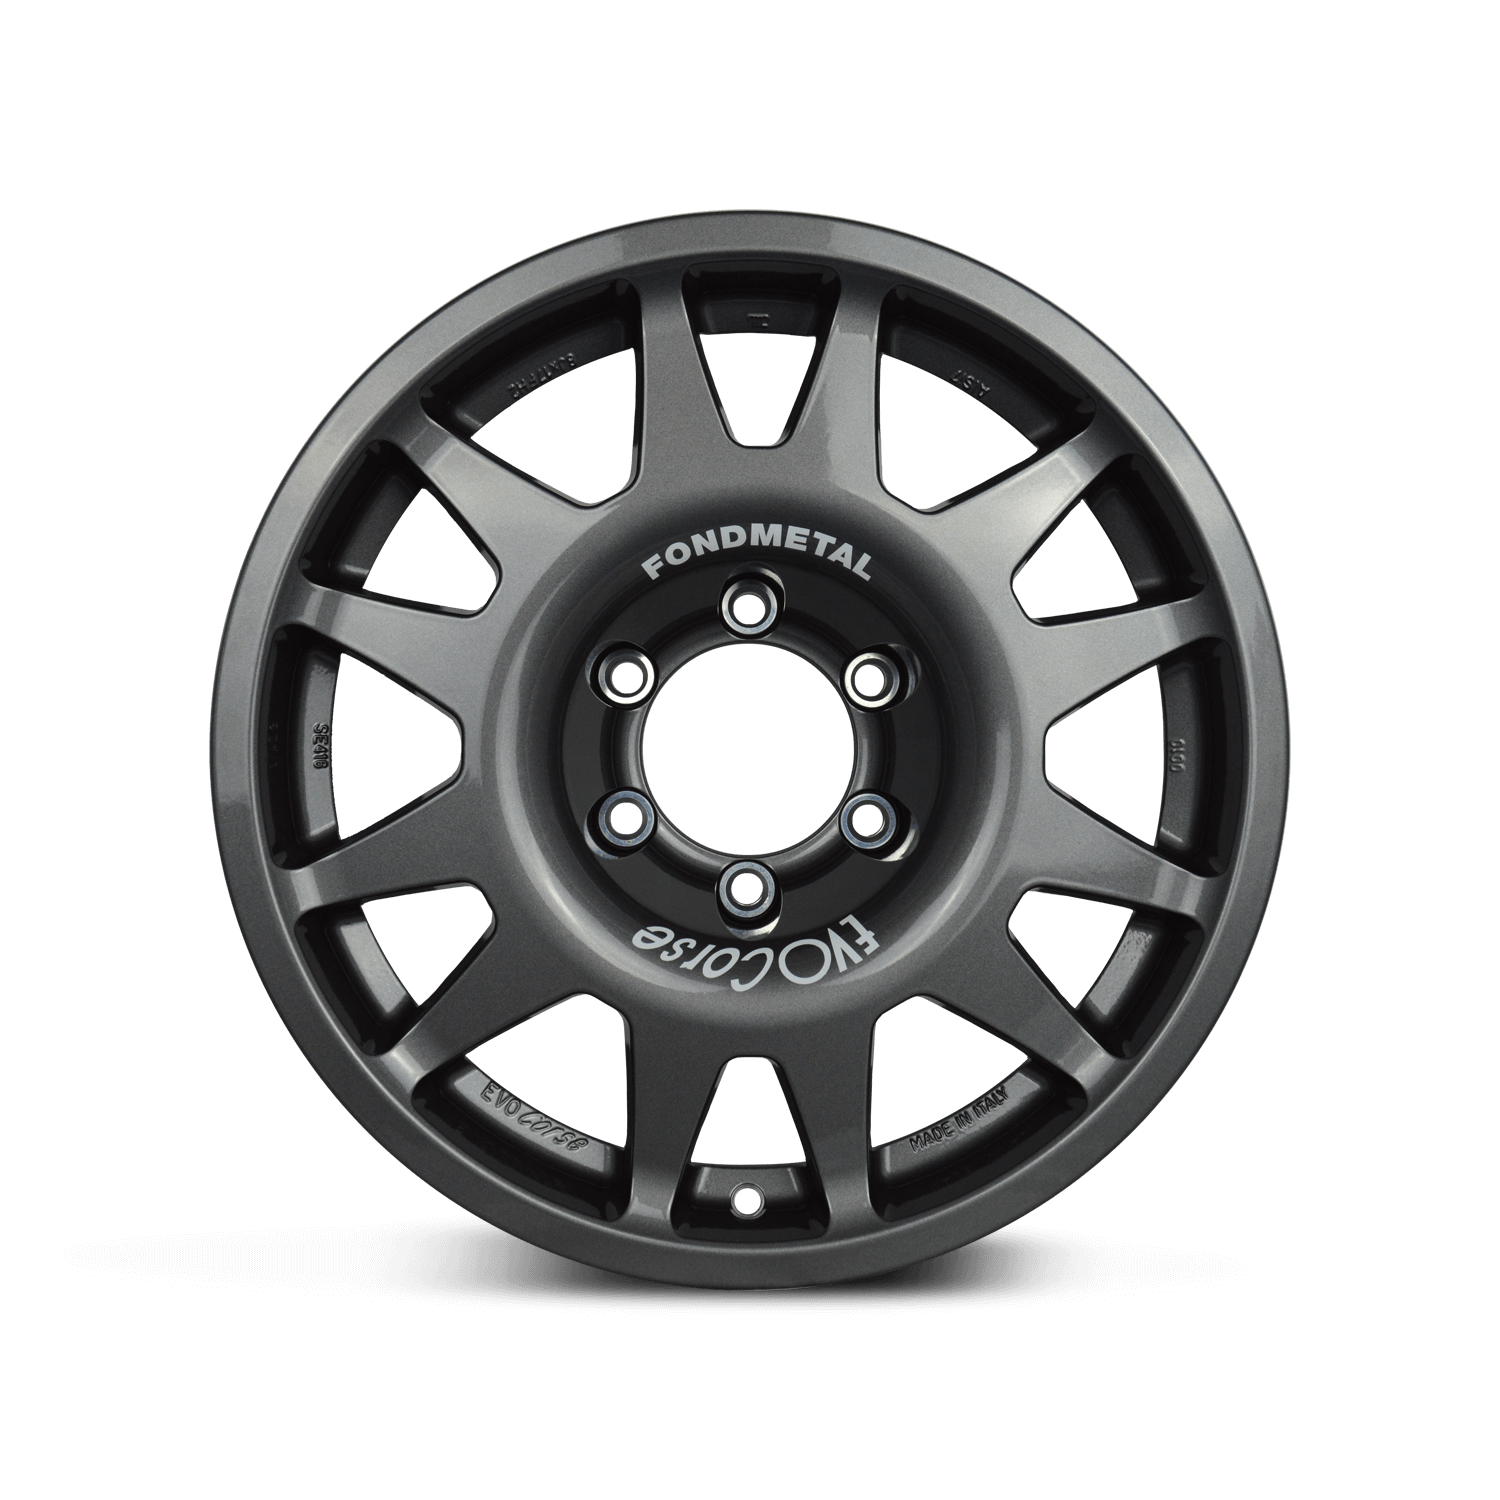 Ineos Grenedier alloy wheel for the grenedier, gloss anthracite front view by Evo Corse, made in Italy, 17 x 8 inch 45 offset, an alloy race wheel off-road best offset and load rating for the grenadier by Ineos , suits BFG Toyo Falken Good Year etc